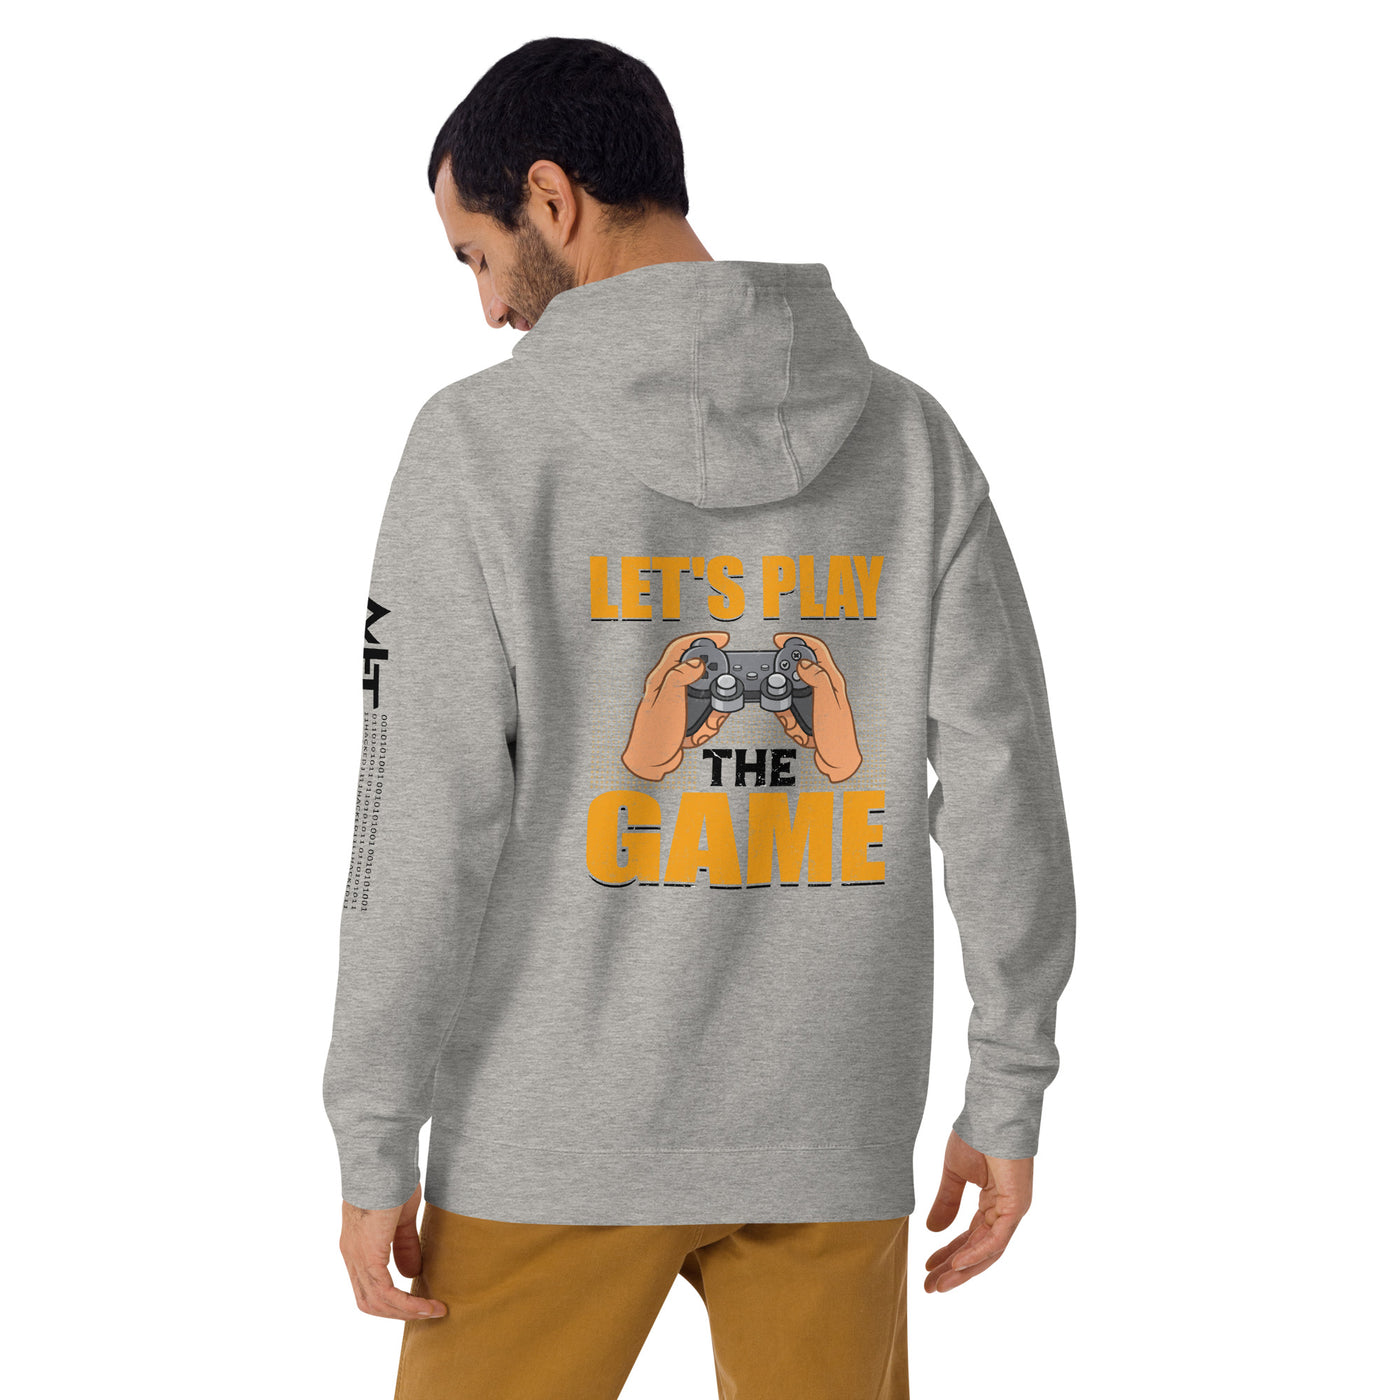 Let's Play the Game in Dark Text - Unisex Hoodie ( Back Print )